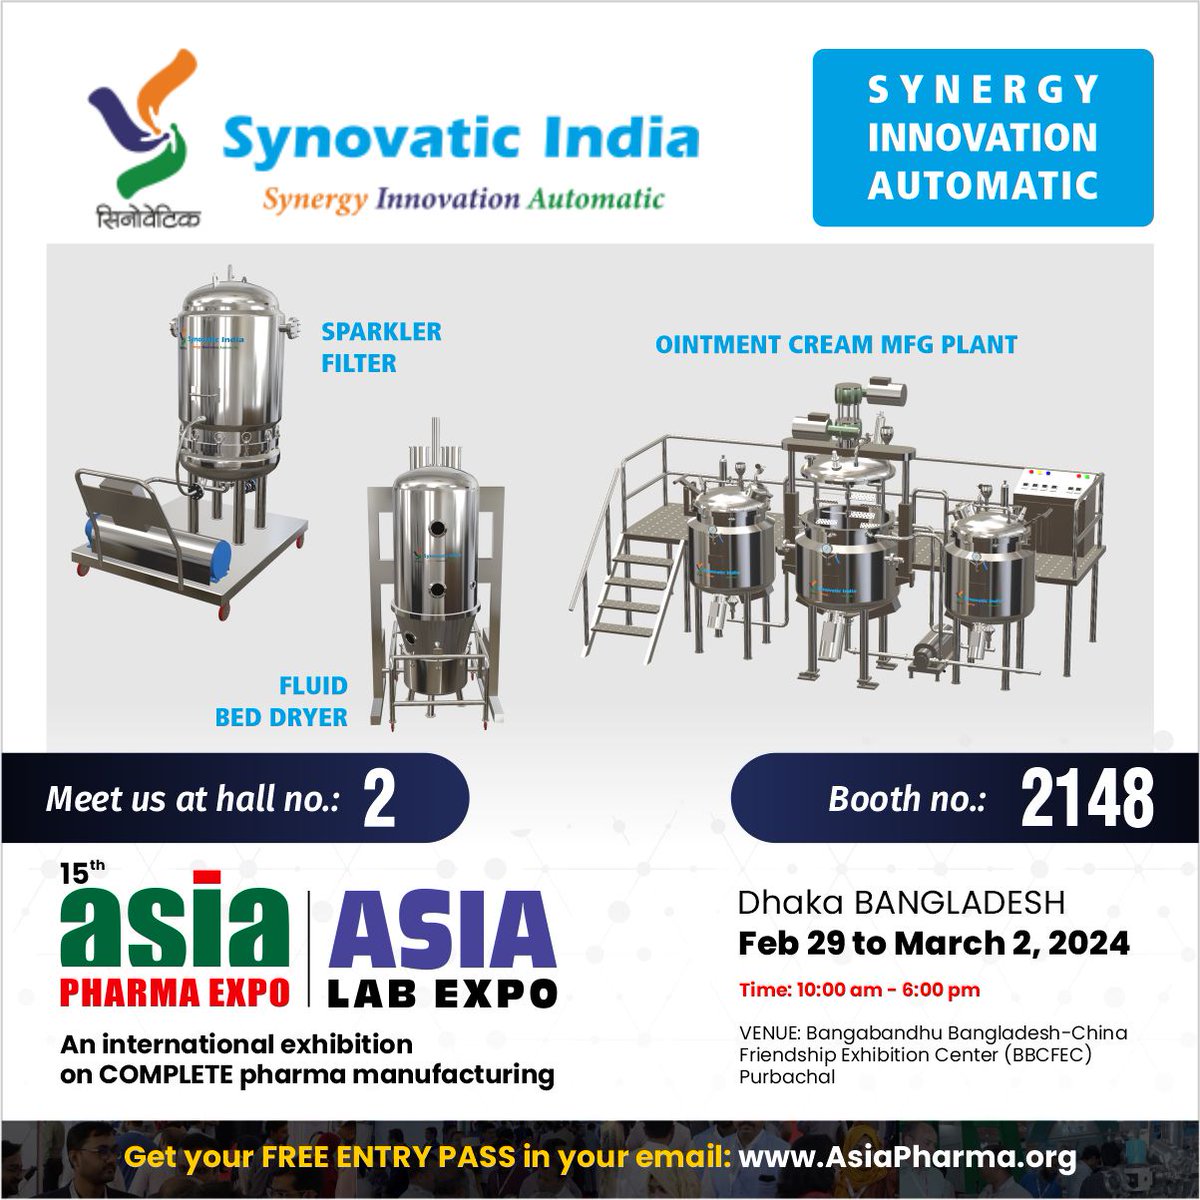 Meet Us @Synovatic 

15th ASIA PHARMA EXPO 2024 
ASIA LAB EXPO 2023
BBCFEC Dhaka BANGLADESH
February 29 to March 2, 2024

For more information and Booth Booking
E Mail: mail@AsiaPharma.org
Website: AsiaPharma.org